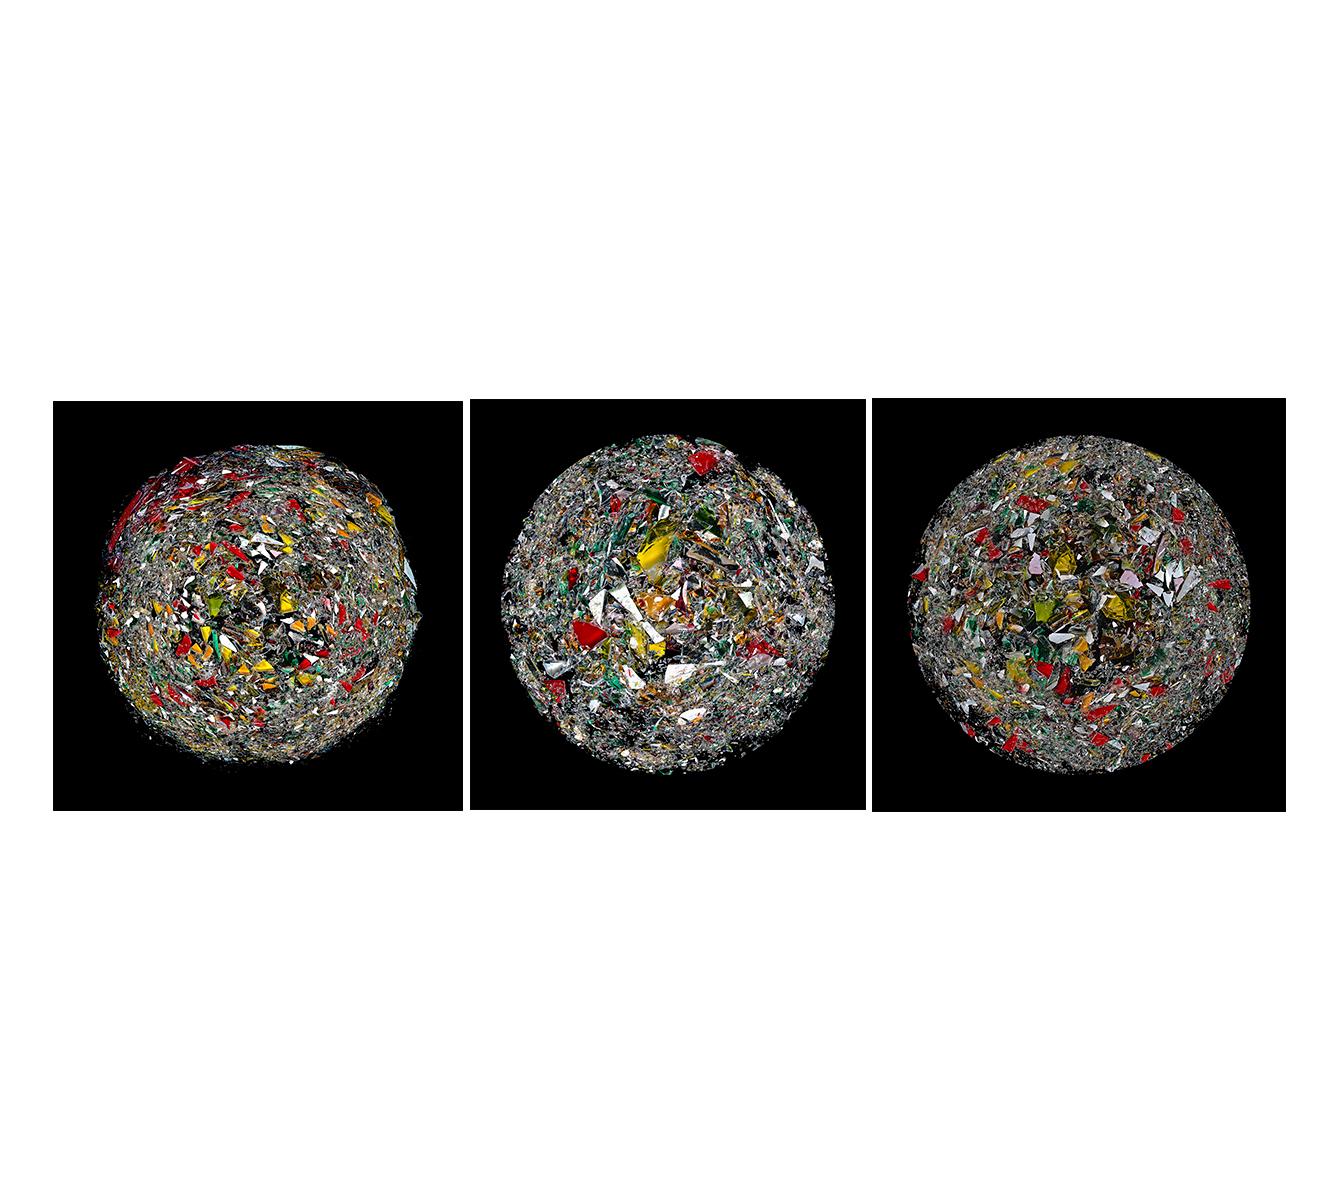 Zoltan Gerliczki Color Photograph - The Broken Planet, The Anger Planet, The Disgust Planet. Digital Photo Collage 